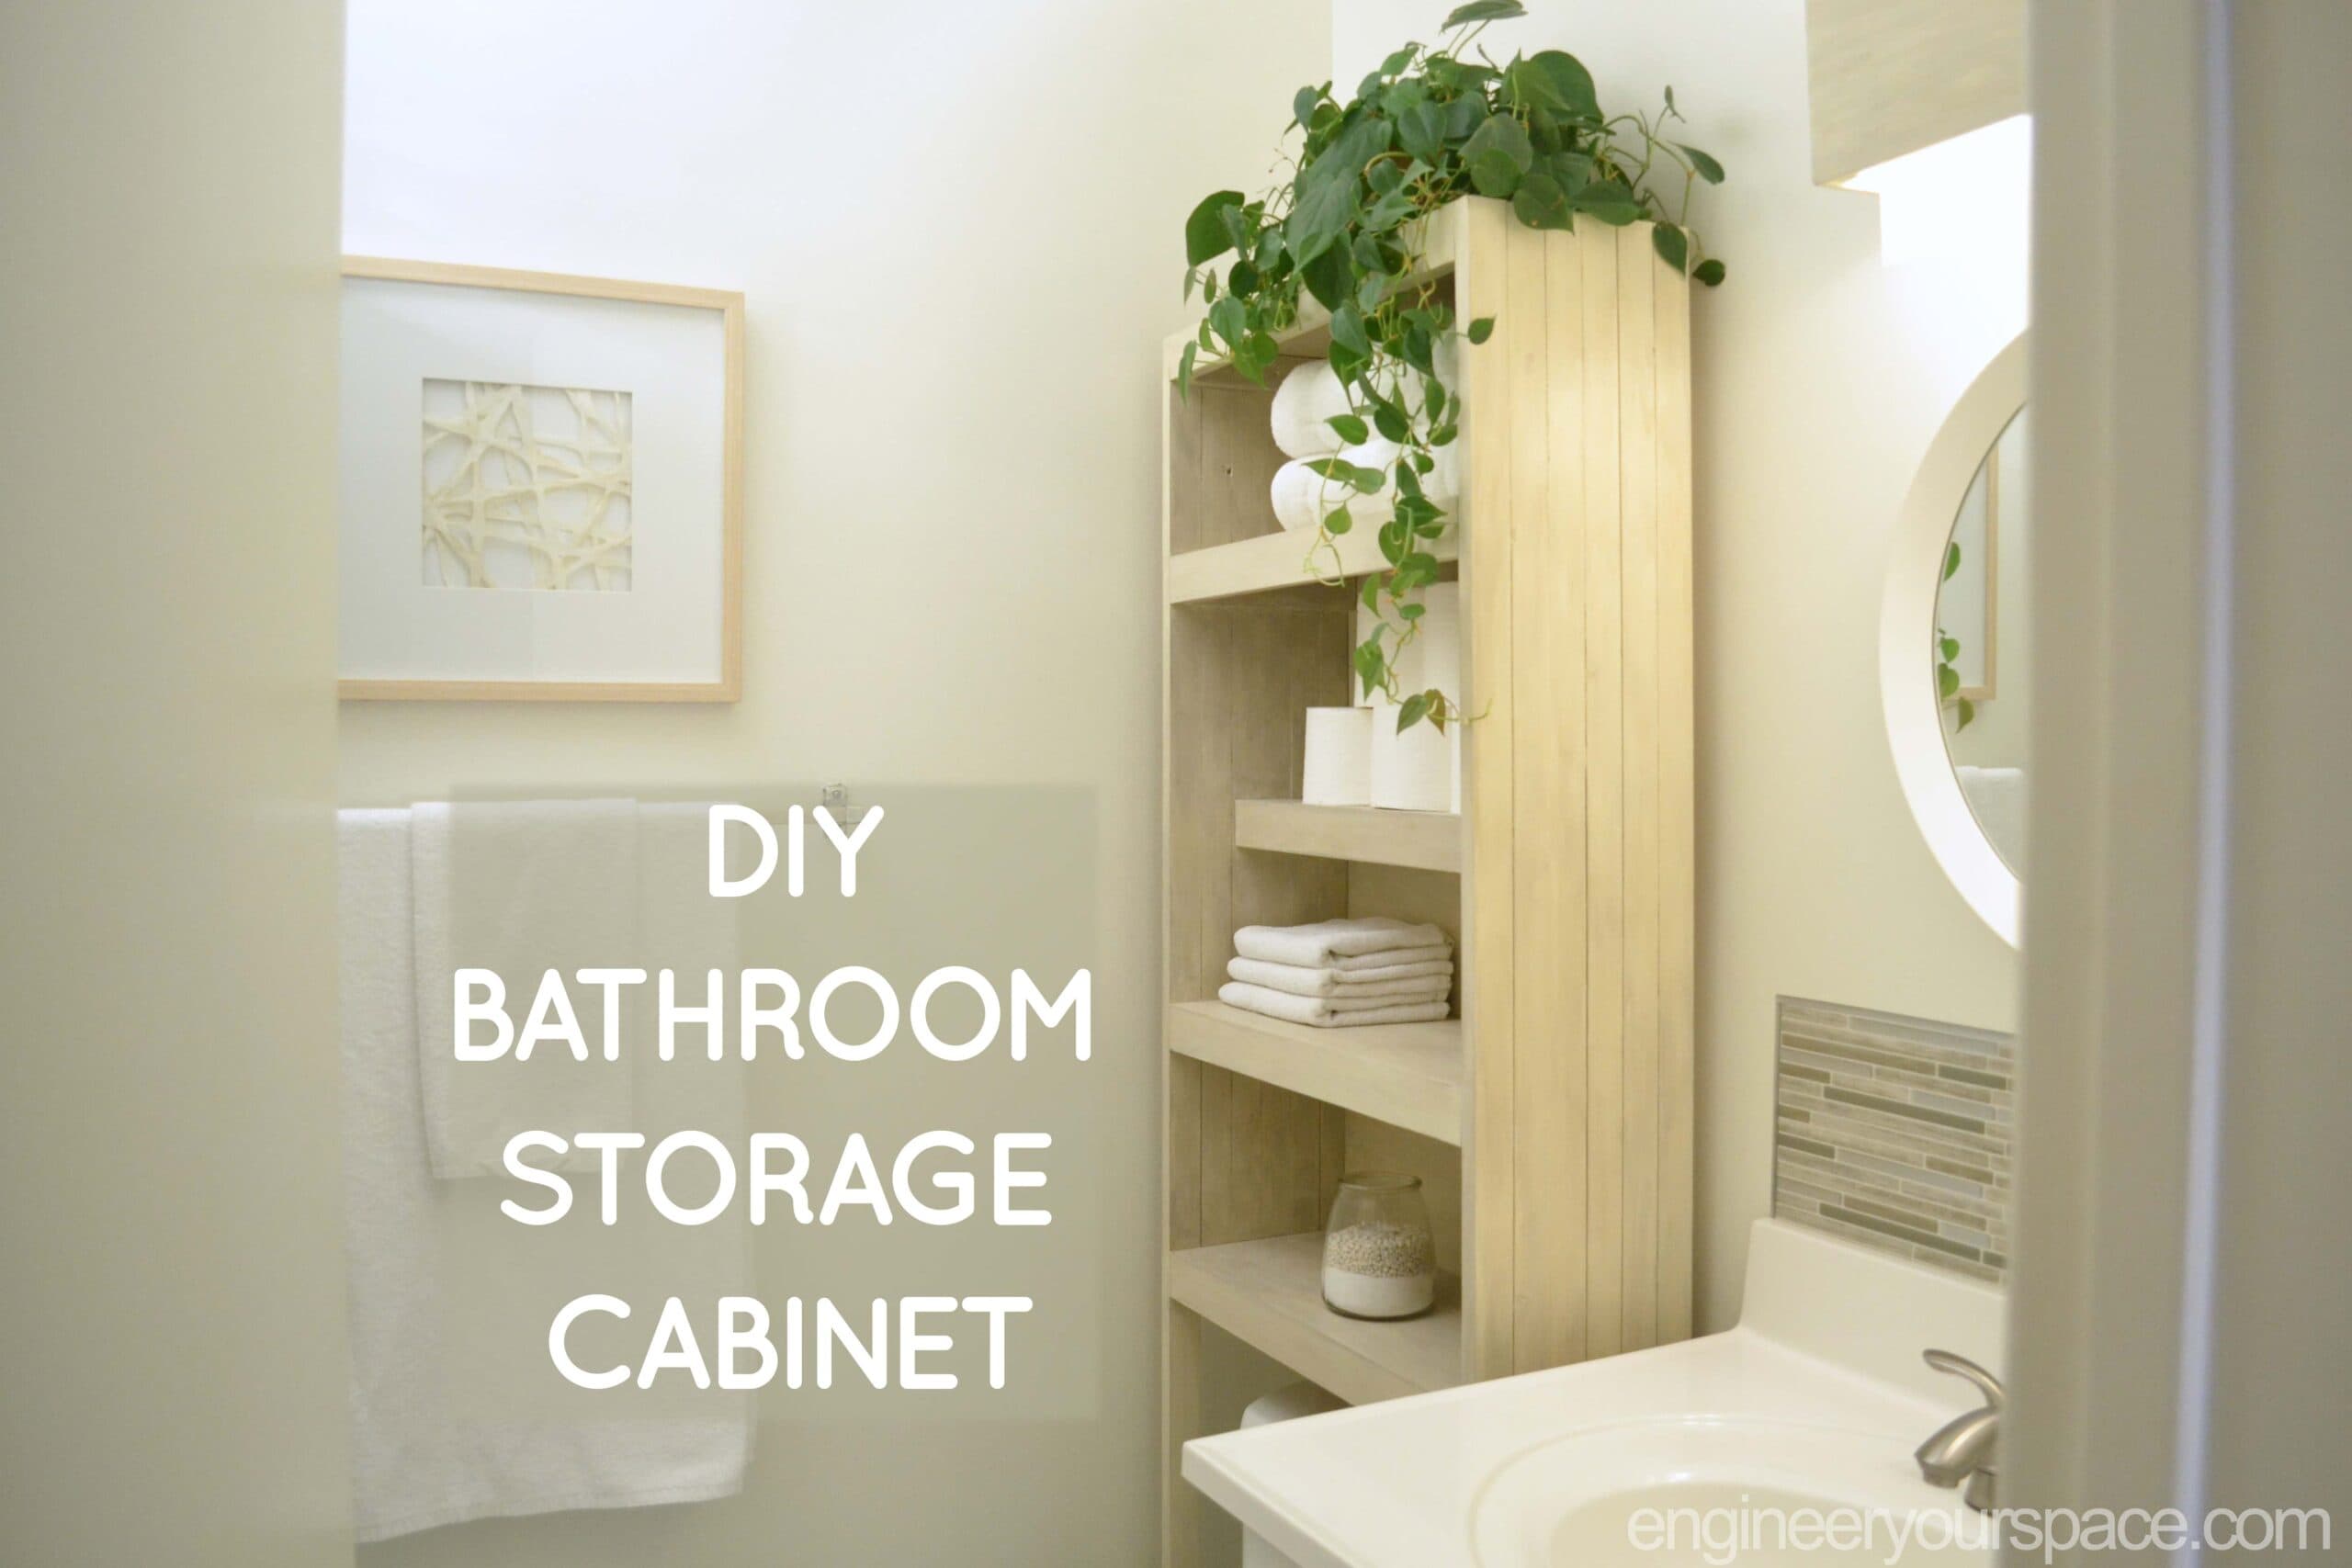 DIY over the toilet storage cabinet - Engineer Your Space